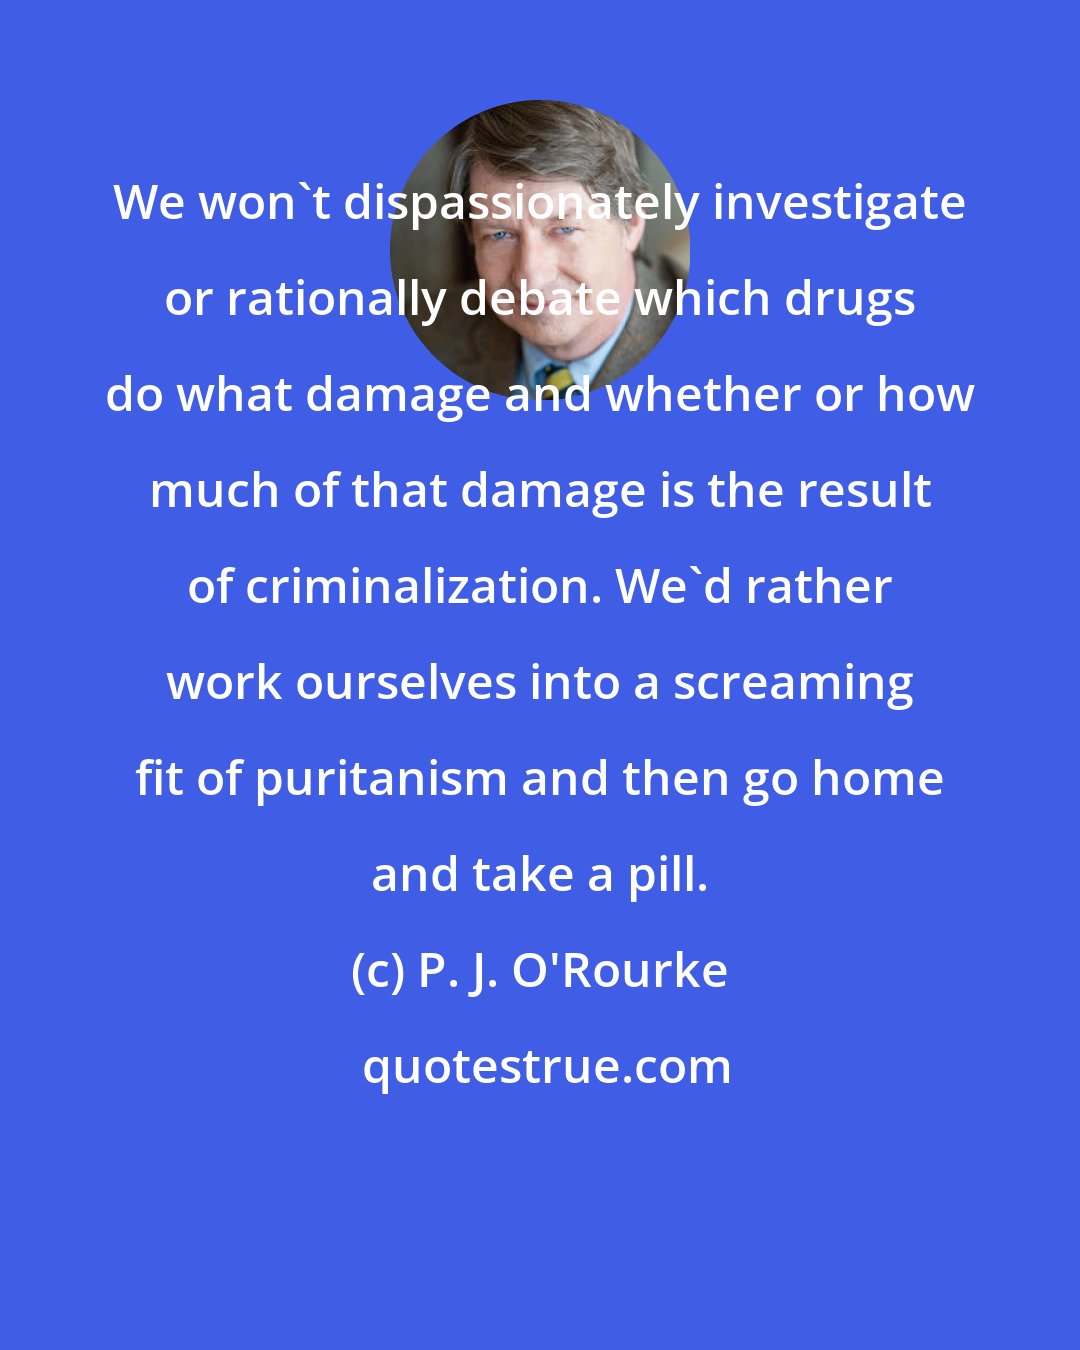 P. J. O'Rourke: We won't dispassionately investigate or rationally debate which drugs do what damage and whether or how much of that damage is the result of criminalization. We'd rather work ourselves into a screaming fit of puritanism and then go home and take a pill.